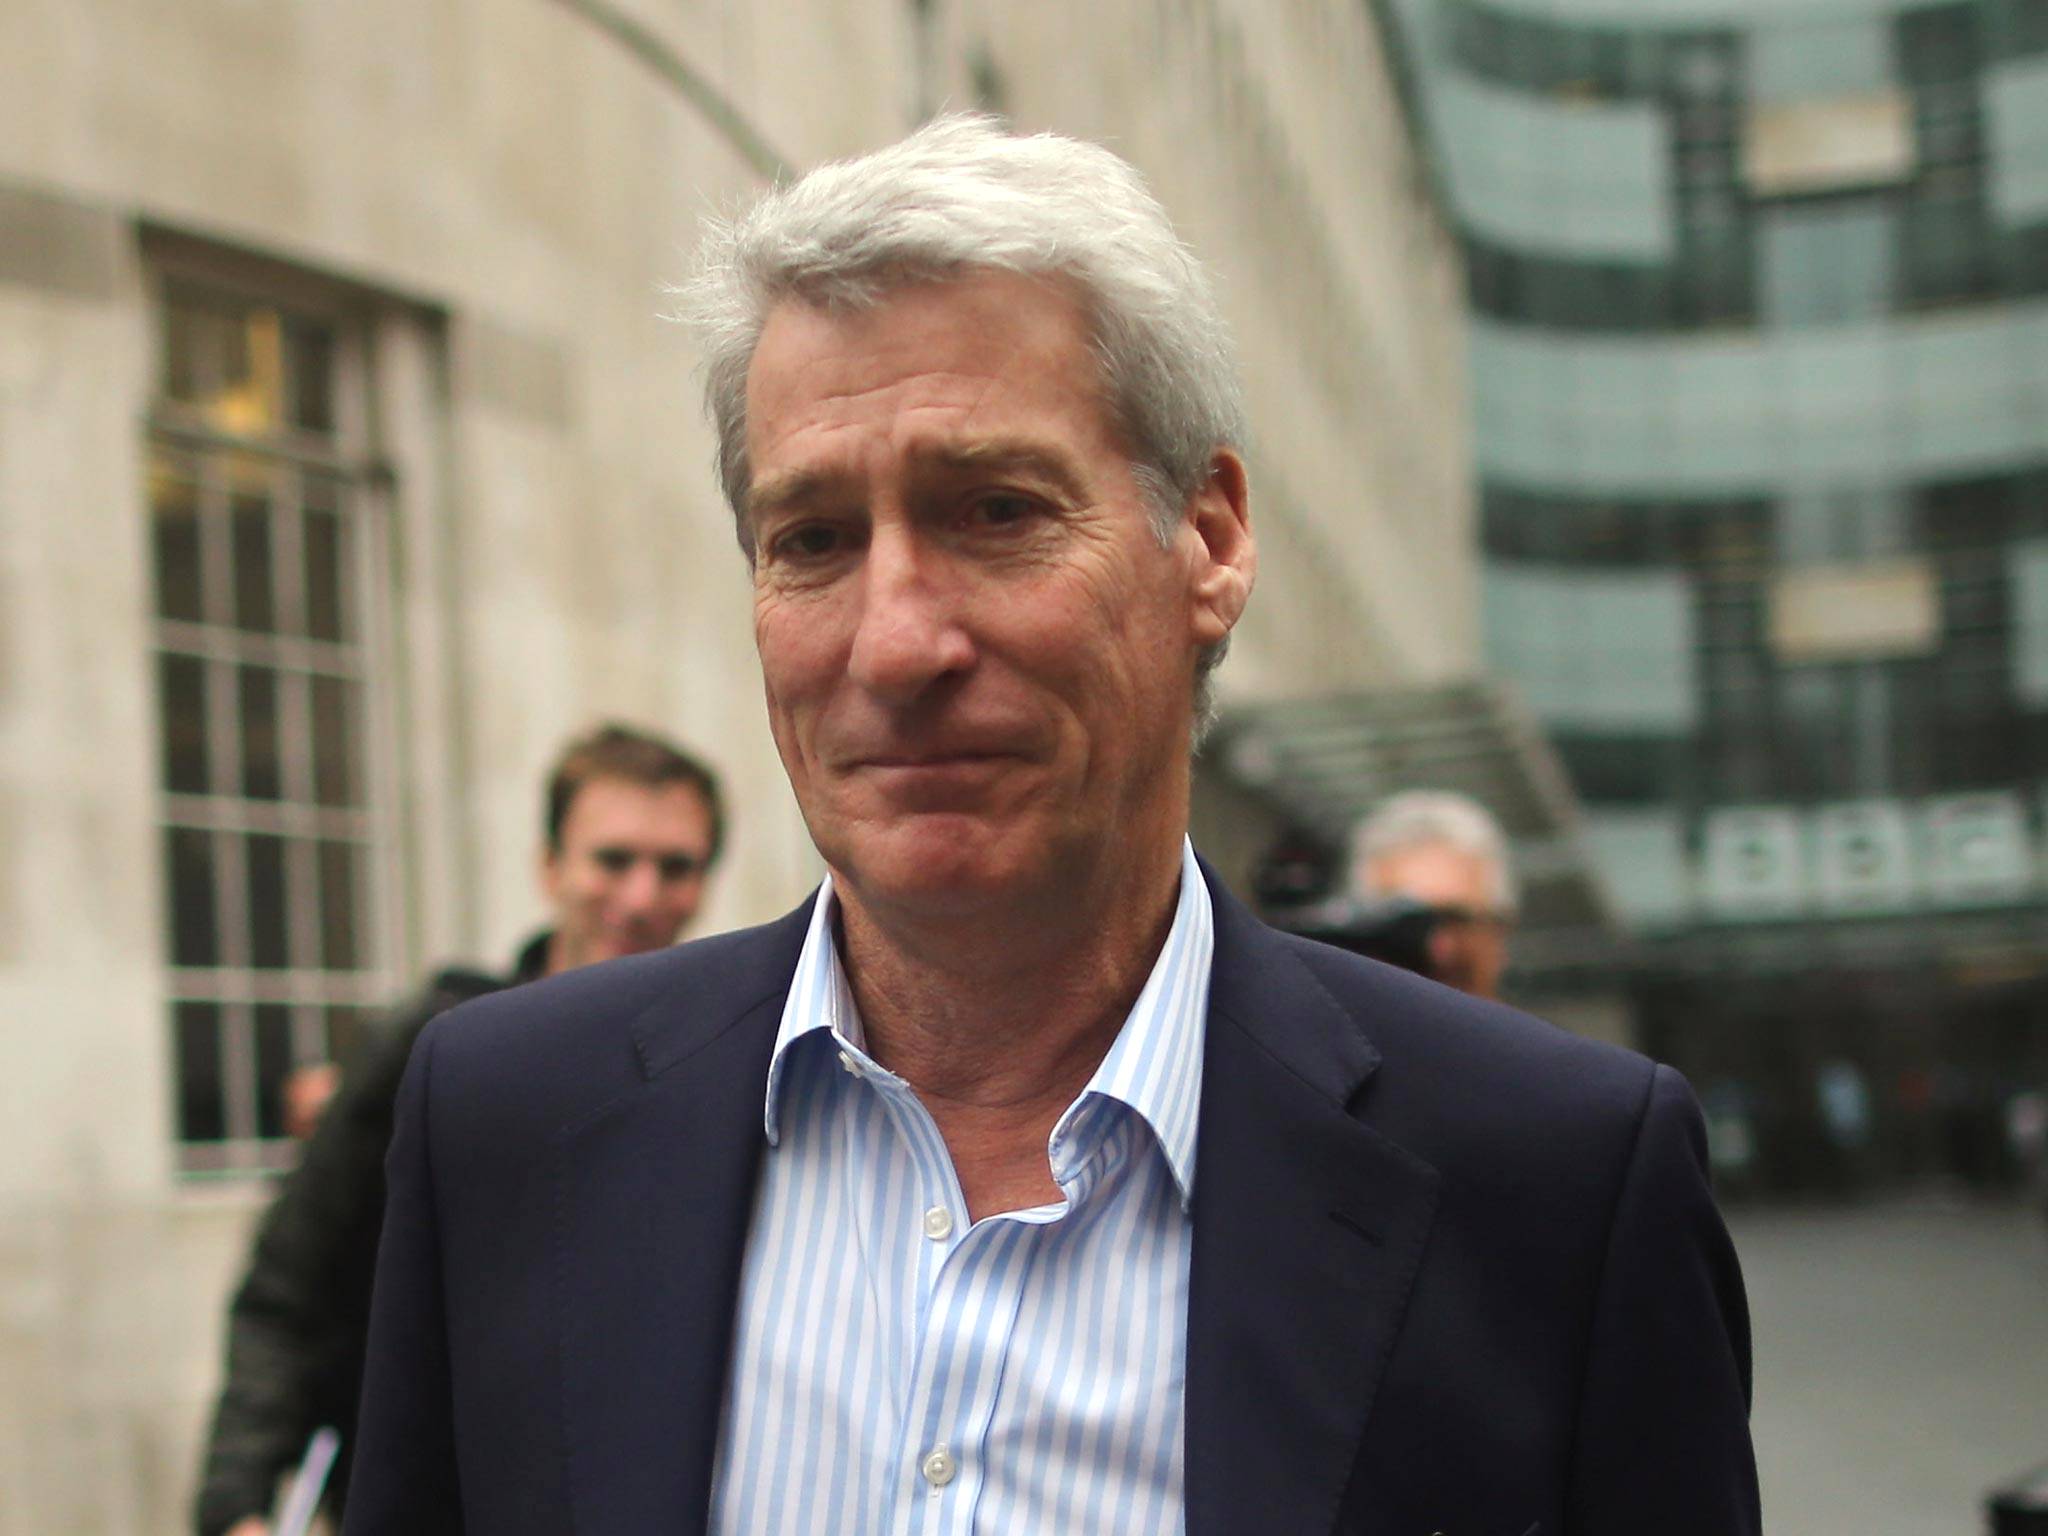 'He's been a pretty terrible prime minister,' Jeremy Paxman told The Late Late Show